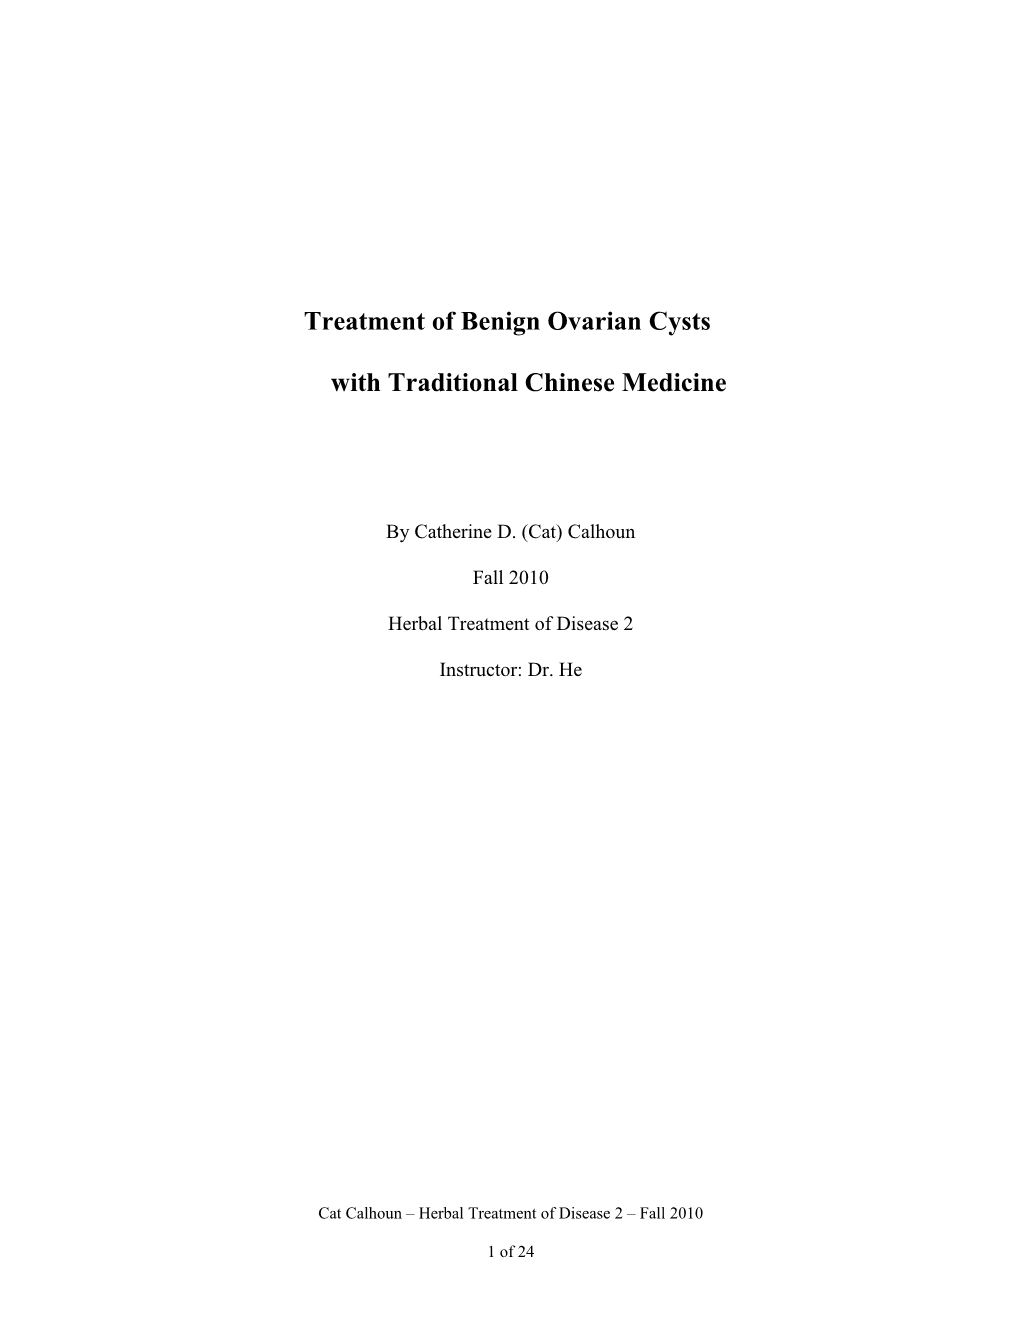 Treatment of Benign Ovarian Cysts with Traditional Chinese Medicine